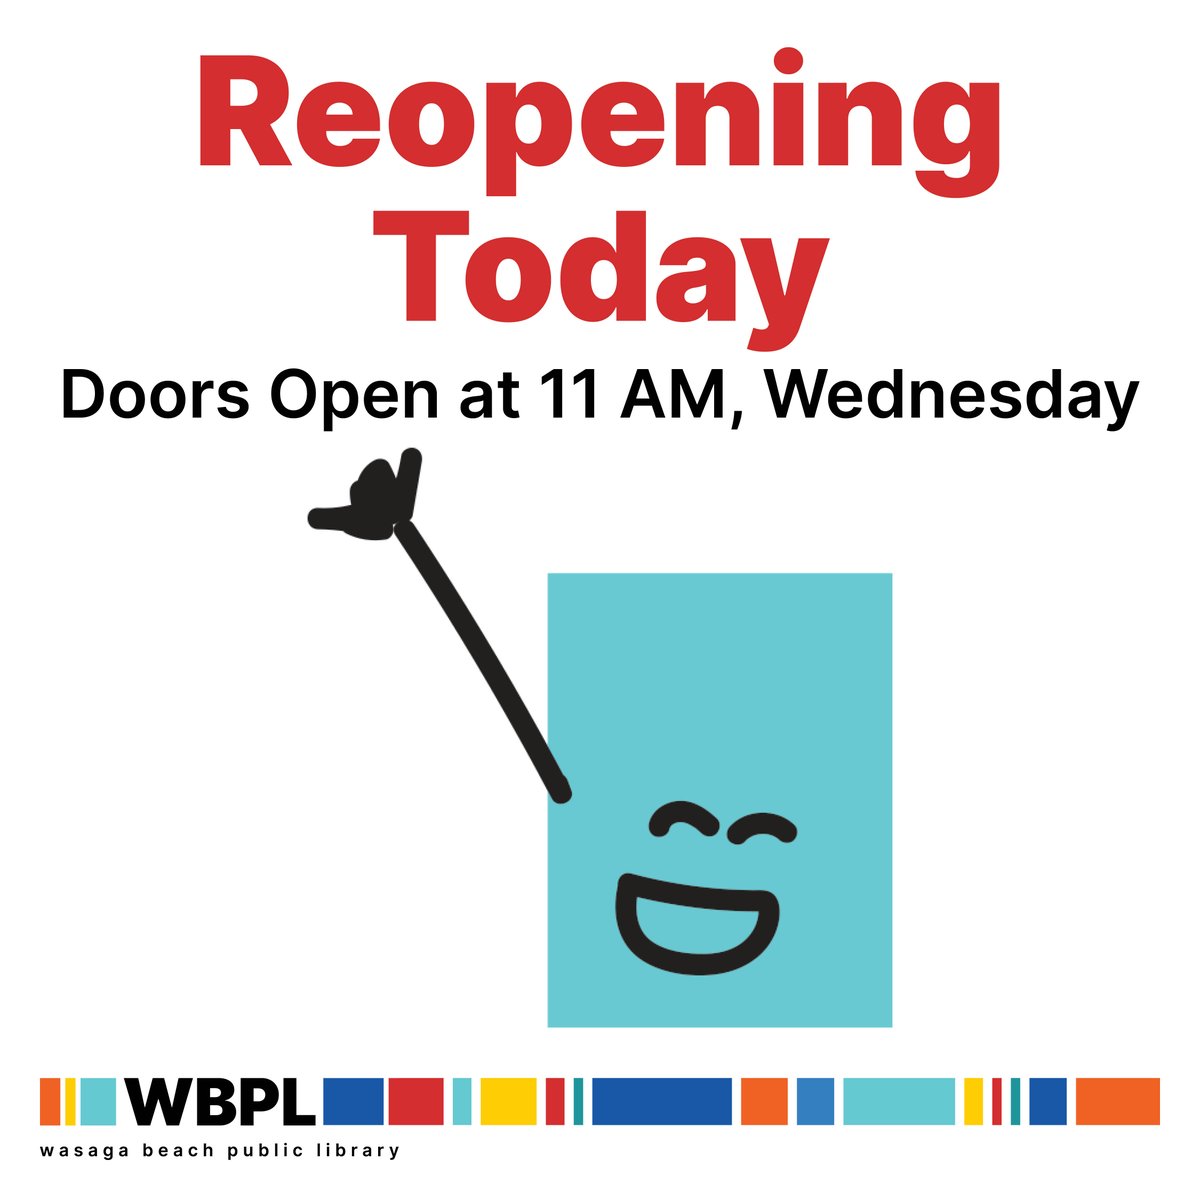 We're excited to announce that the library will reopen at 11 AM today after yesterday's closure. Thank you for your patience and understanding. We look forward to welcoming you back! 📚 #OpenForBusiness #WasagaBeach #FindItHere